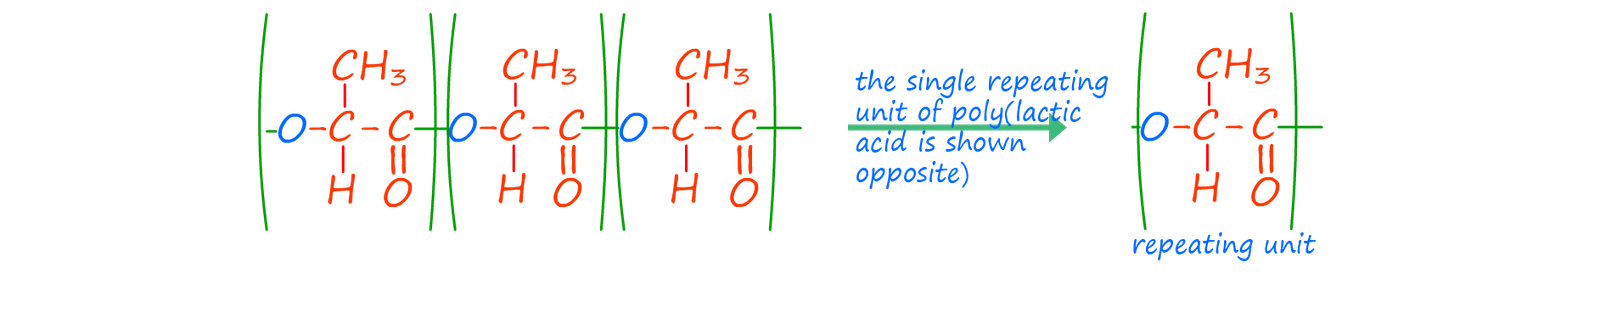 Formation of poly(lactic acid) from lactic acid molecules, the structure of the repeat unit.